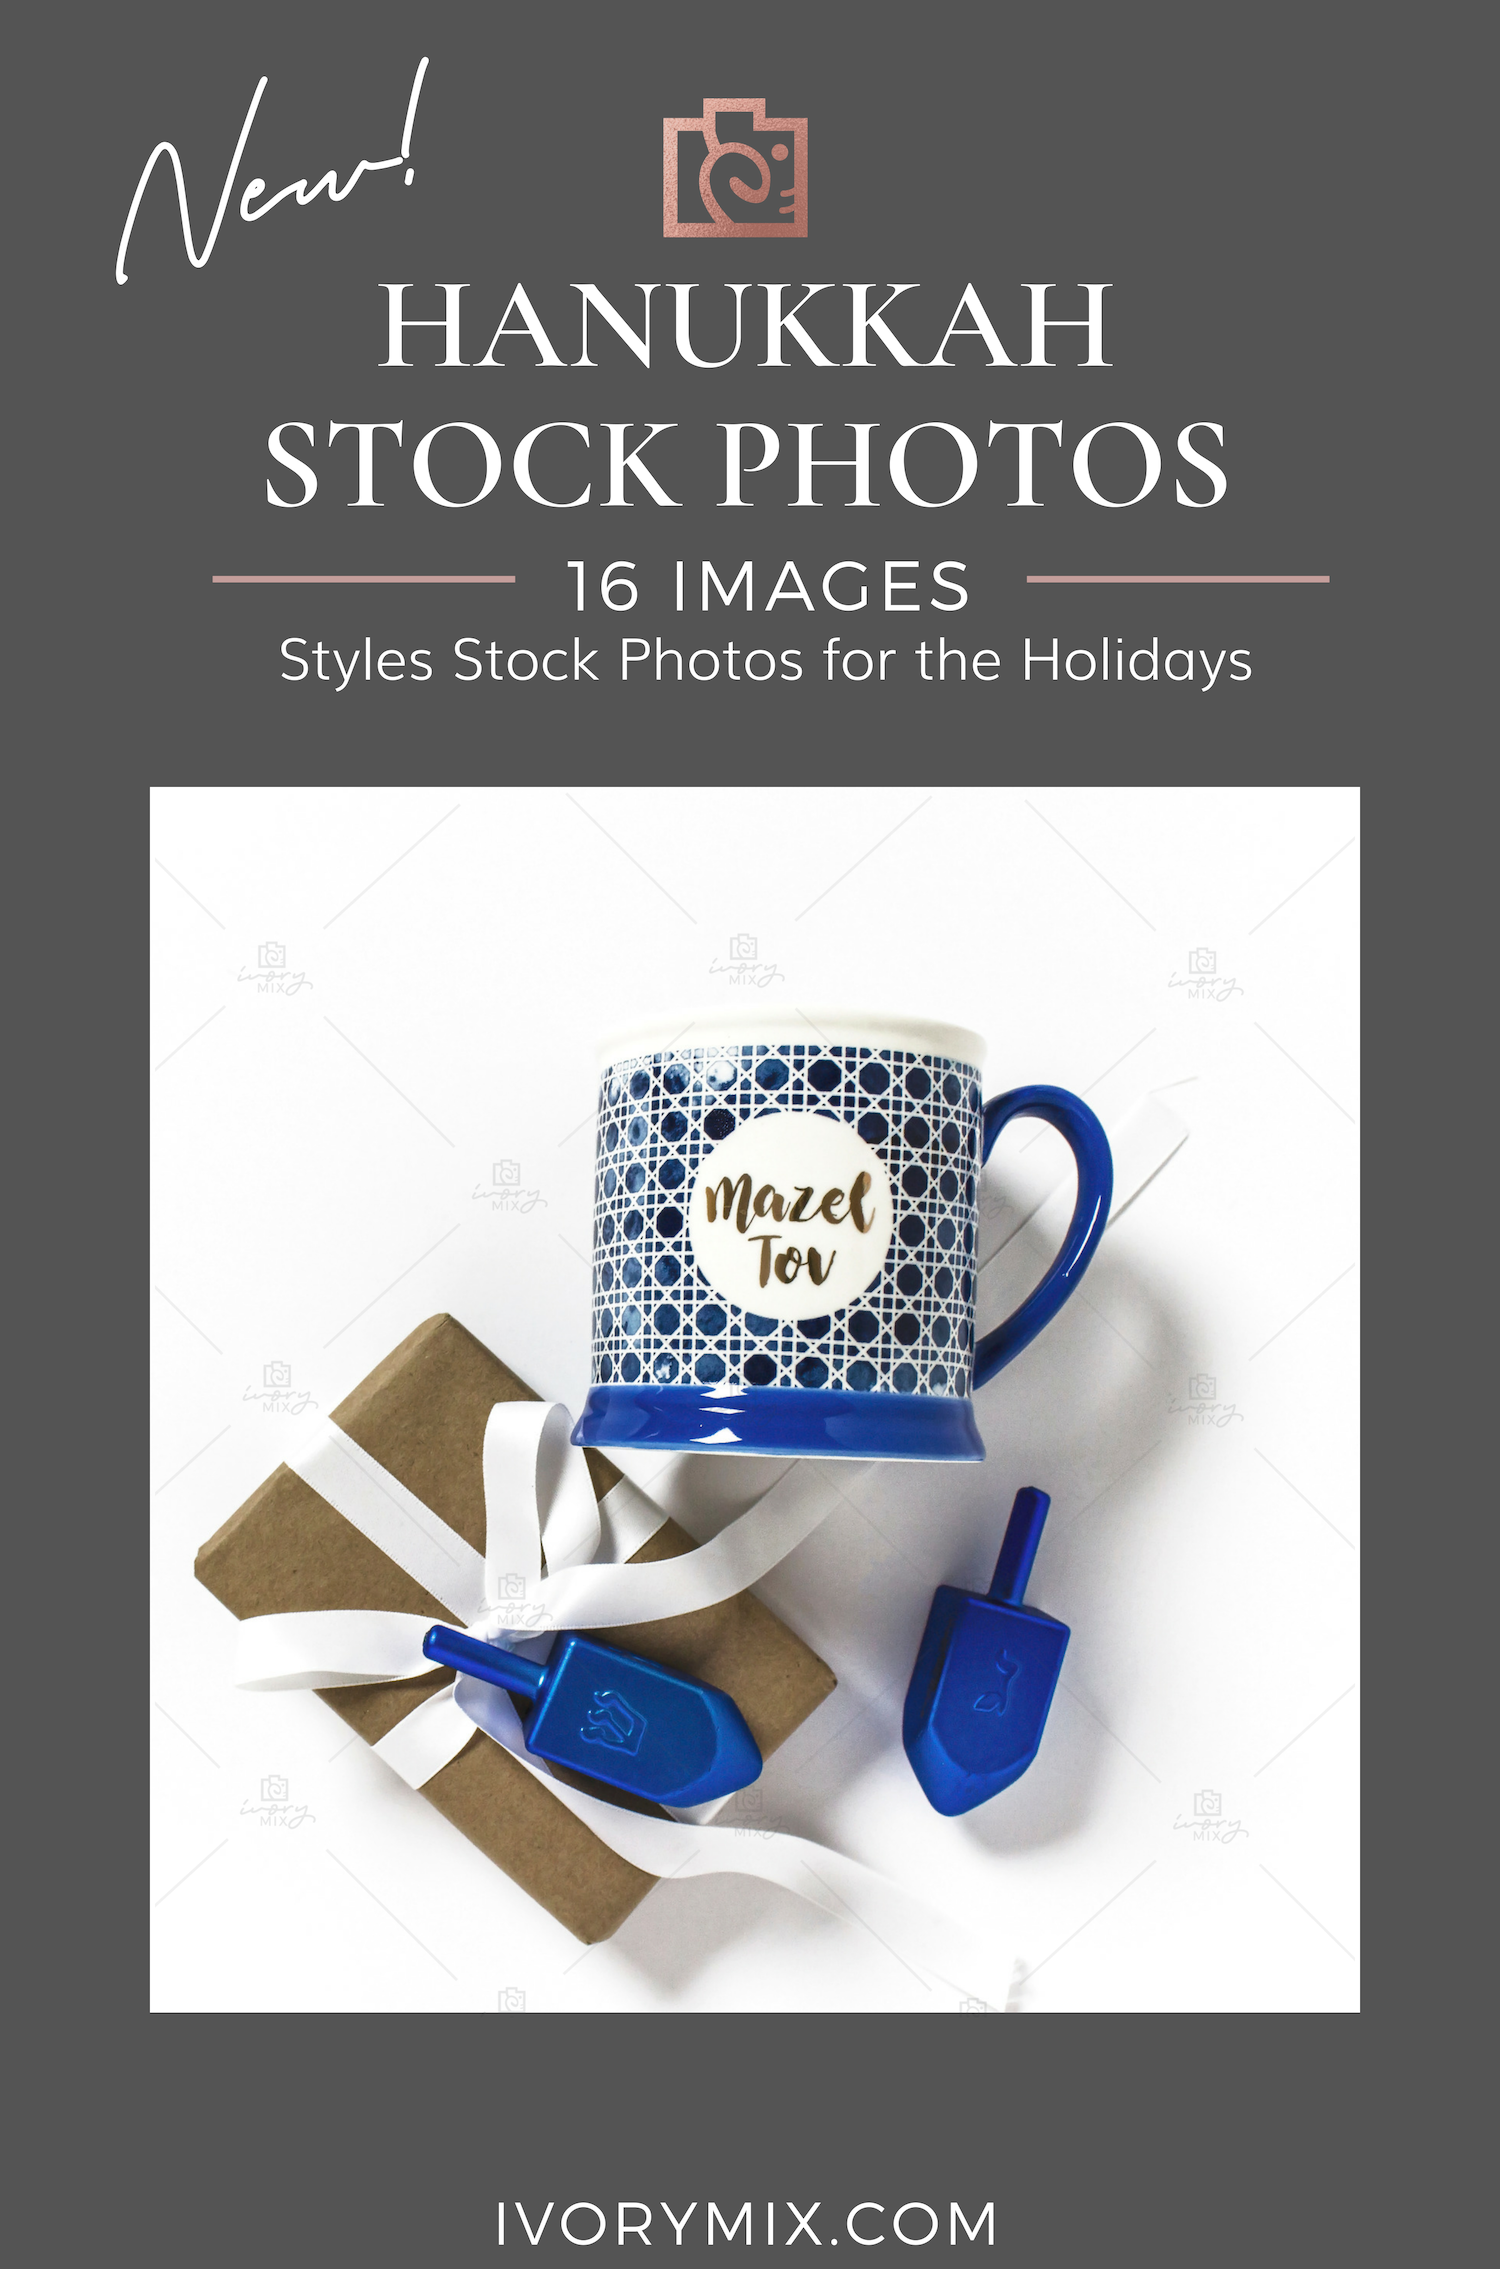 Hannukah Styled Stock Photos Download your holiday Images and Pictures for your the holidays